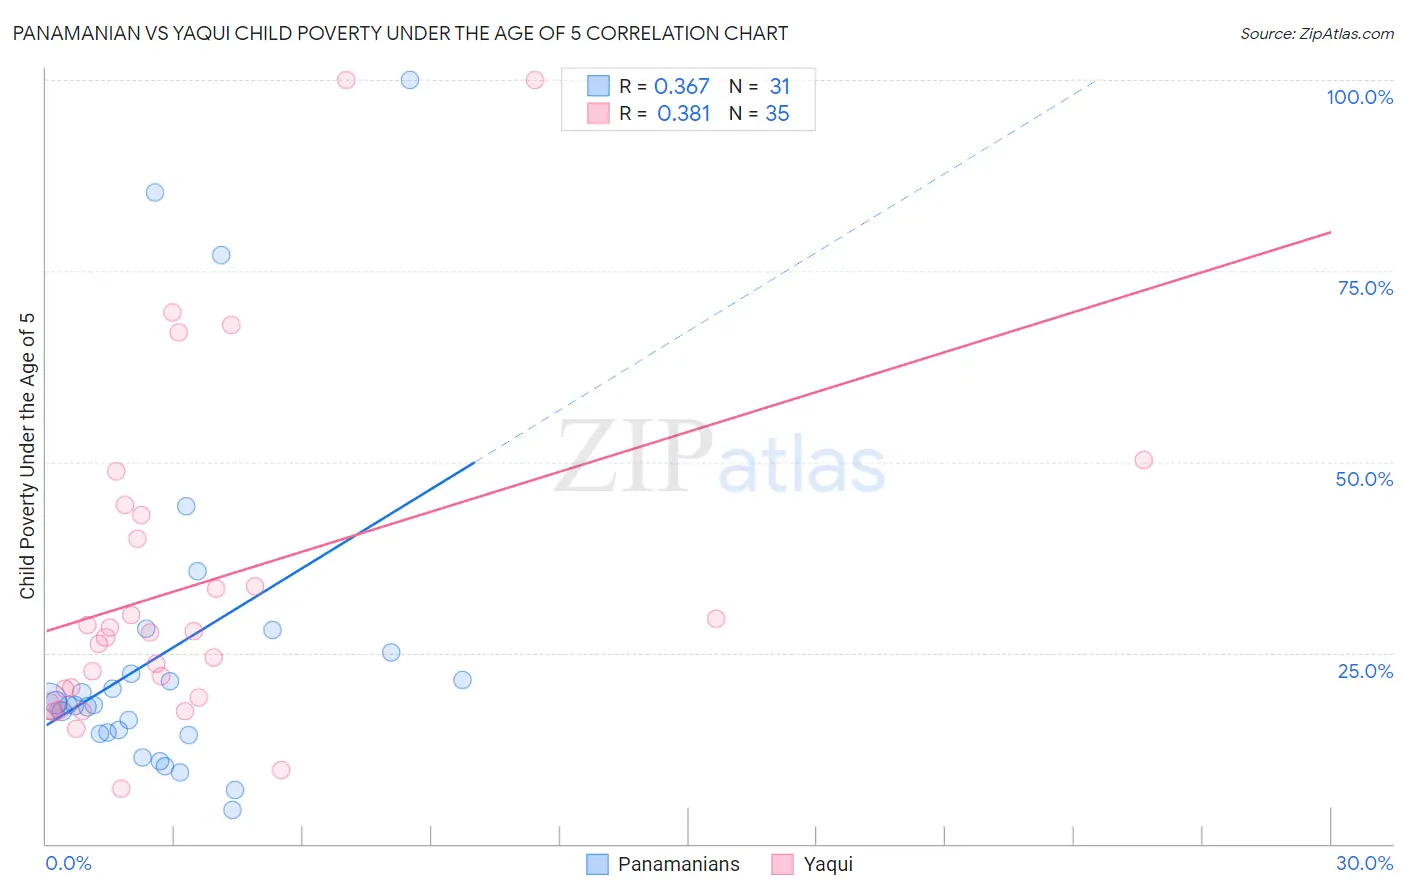 Panamanian vs Yaqui Child Poverty Under the Age of 5